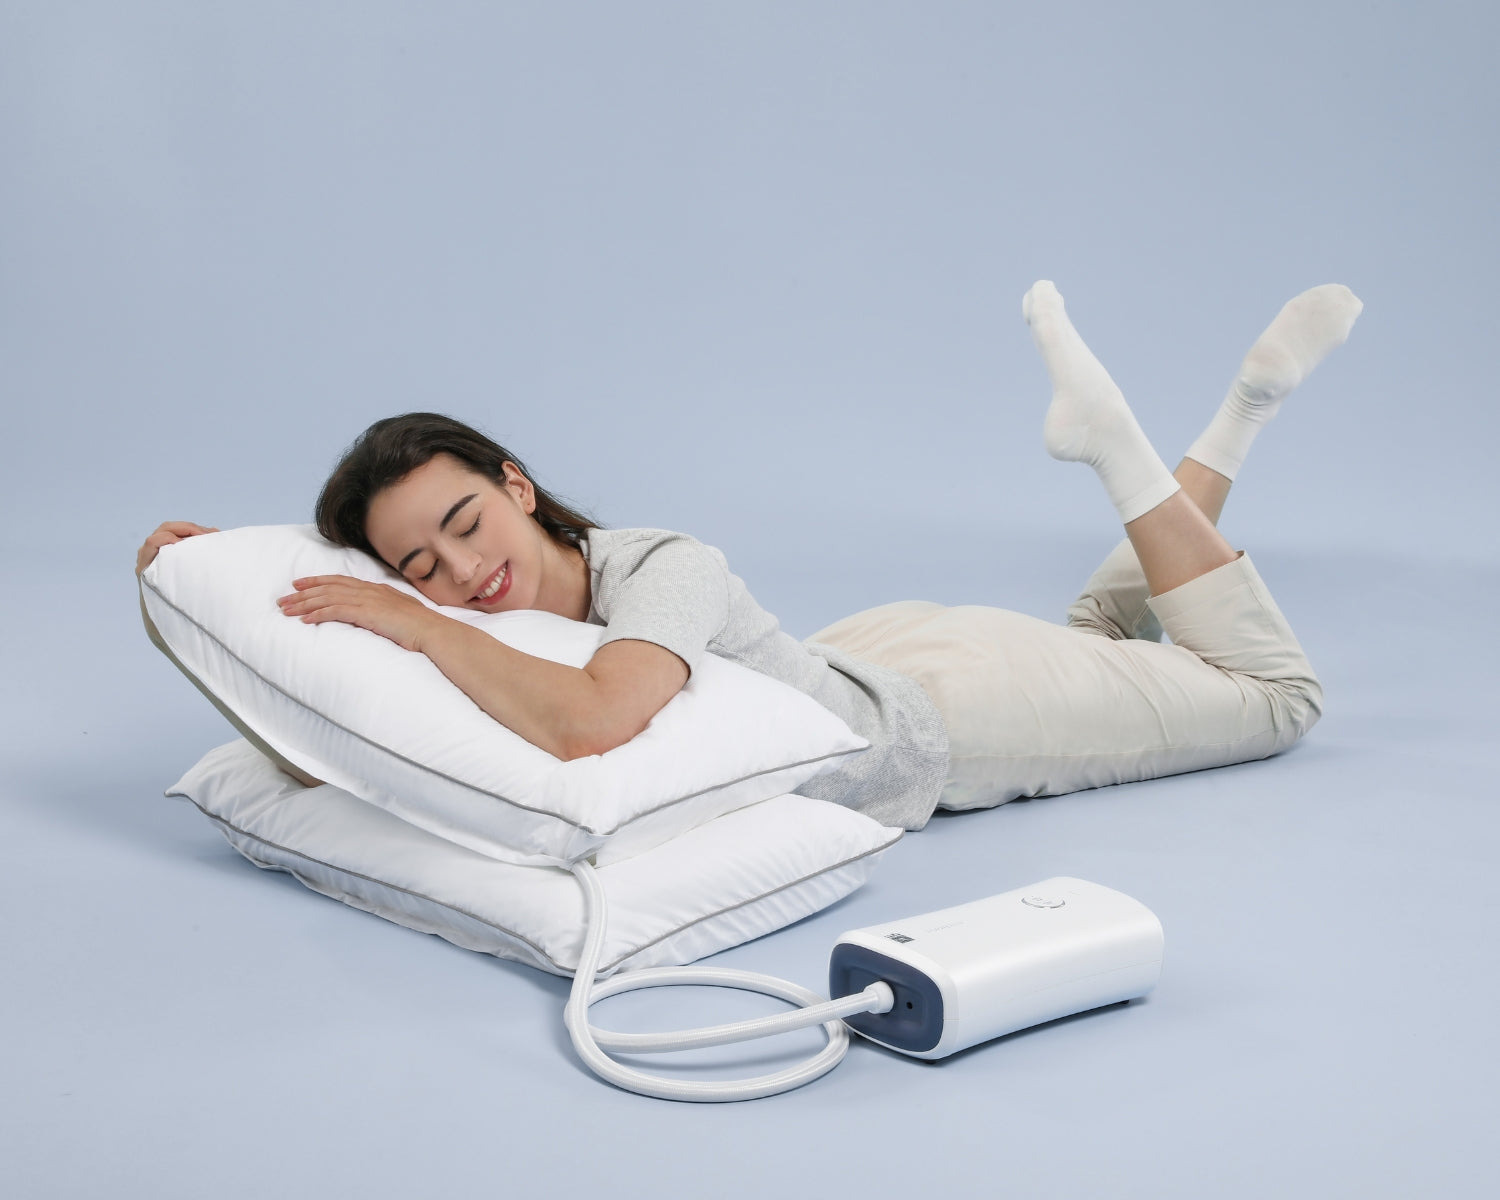 Which Products to Help You Stop Snoring -- Nitetronic anti-snore pillow